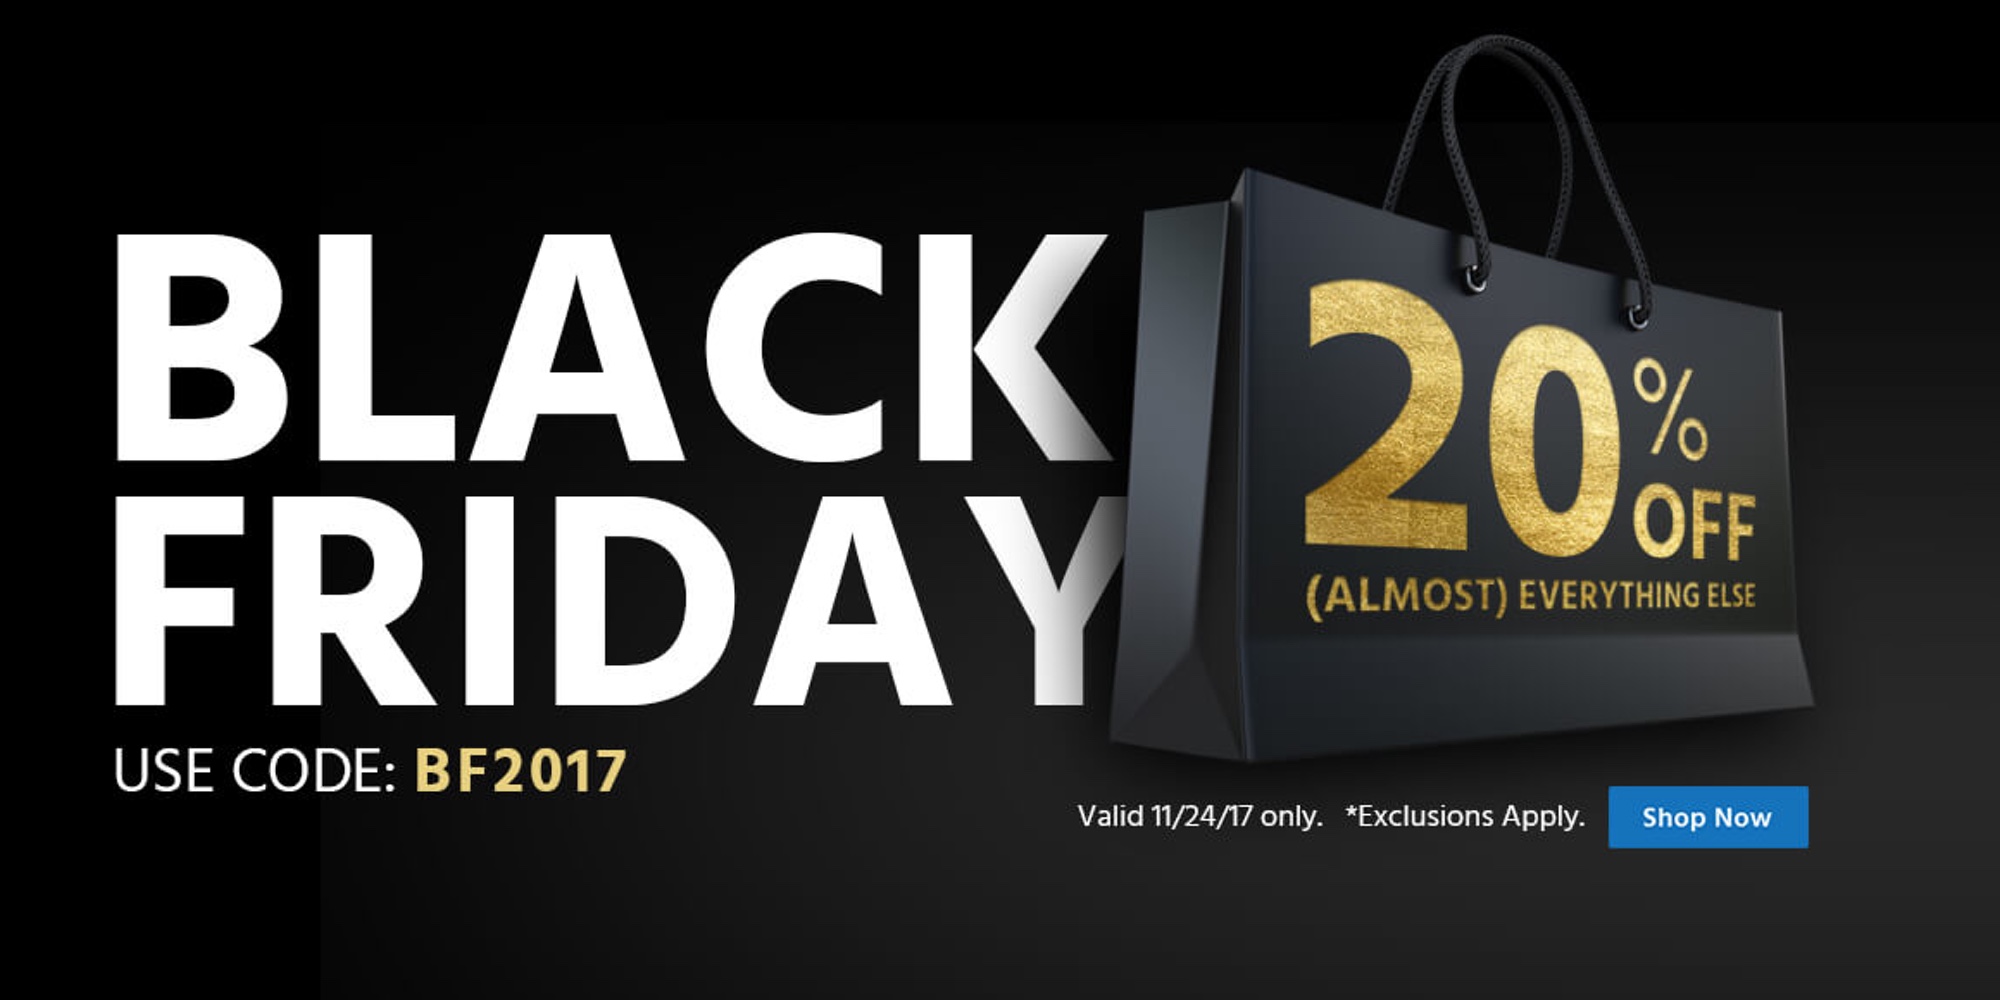 Monoprice Black Friday coupon code takes 20% off sitewide: cables - Will Ww Have A Black Friday Deal In 2022